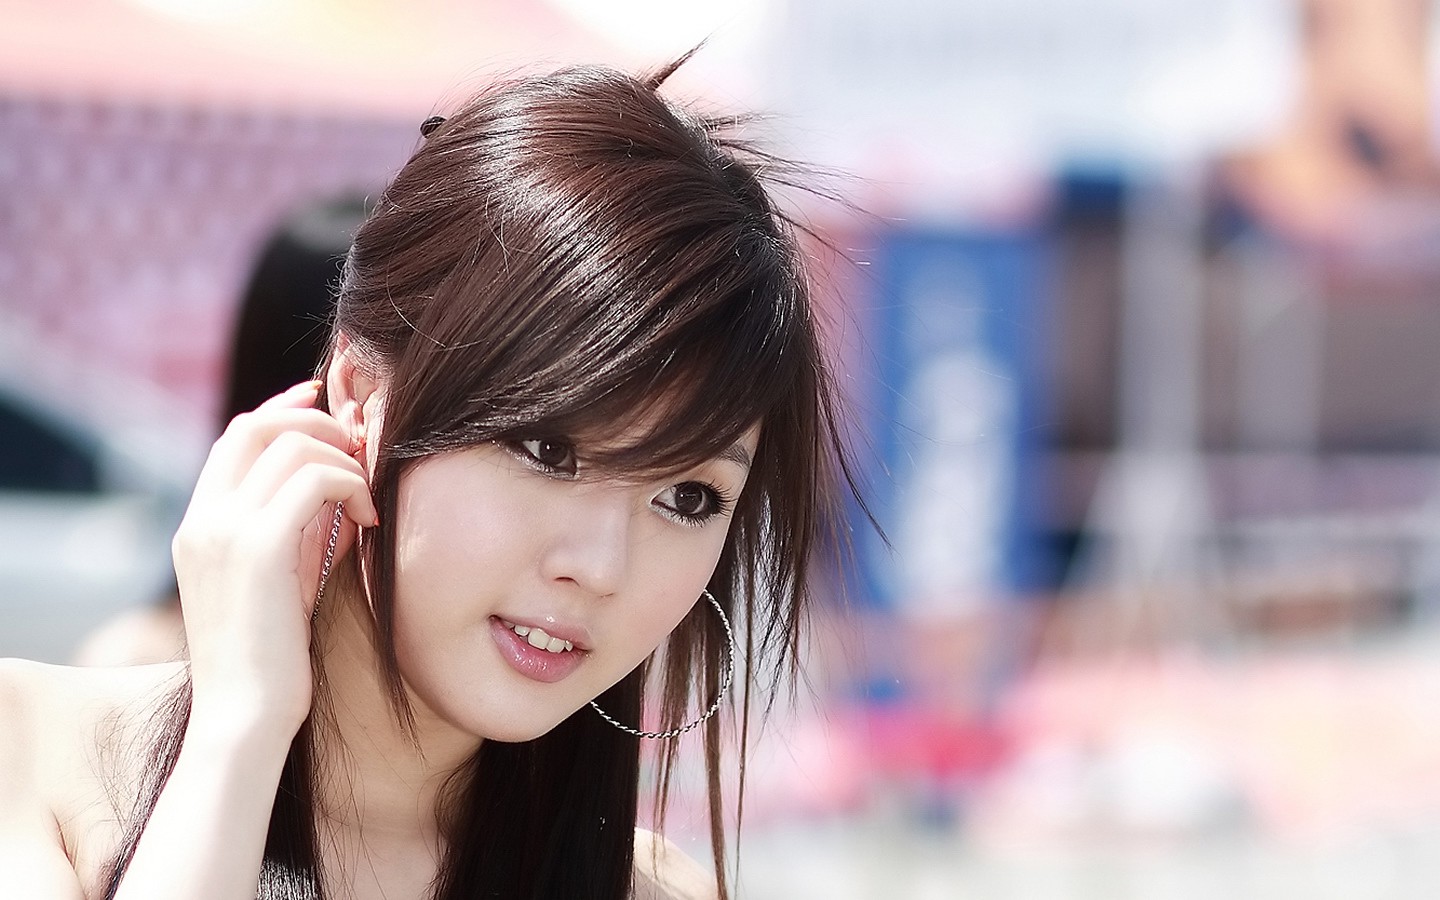 Asian Women Wallpapers Hd Desktop And Mobile Backgrounds